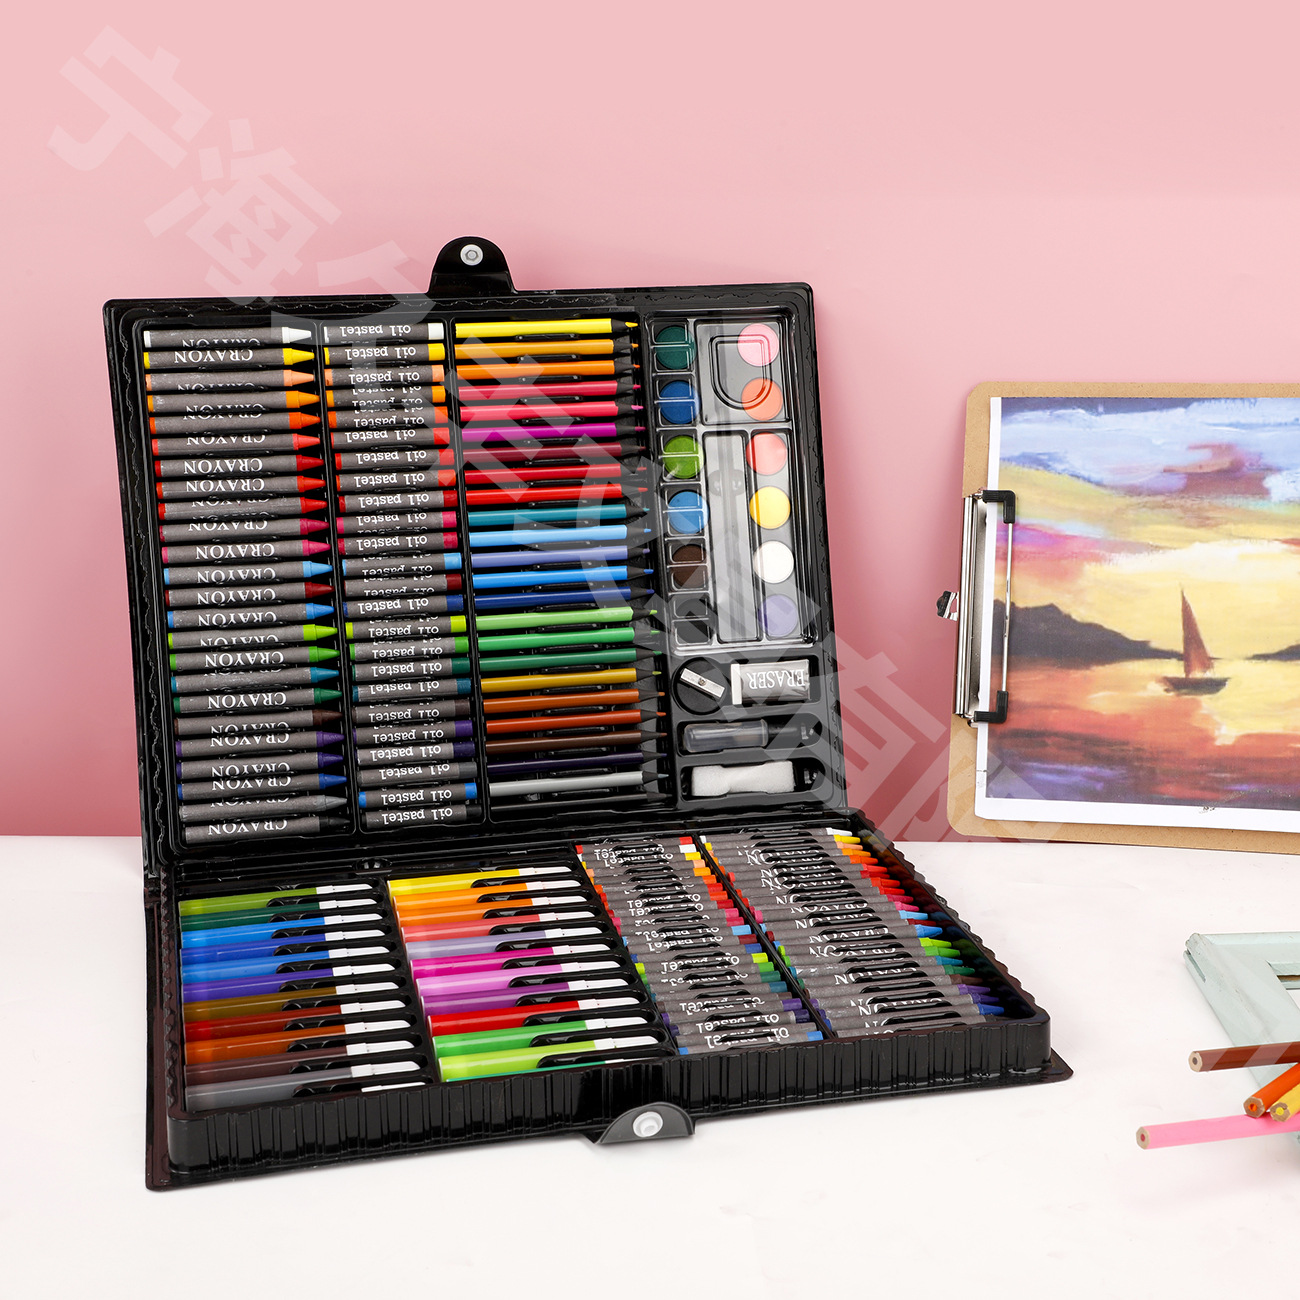 June 1 168 Set Stationery Color Lead Wax Crayon Oil Pastels Watercolor Pen Painting Children's Day Gift Set